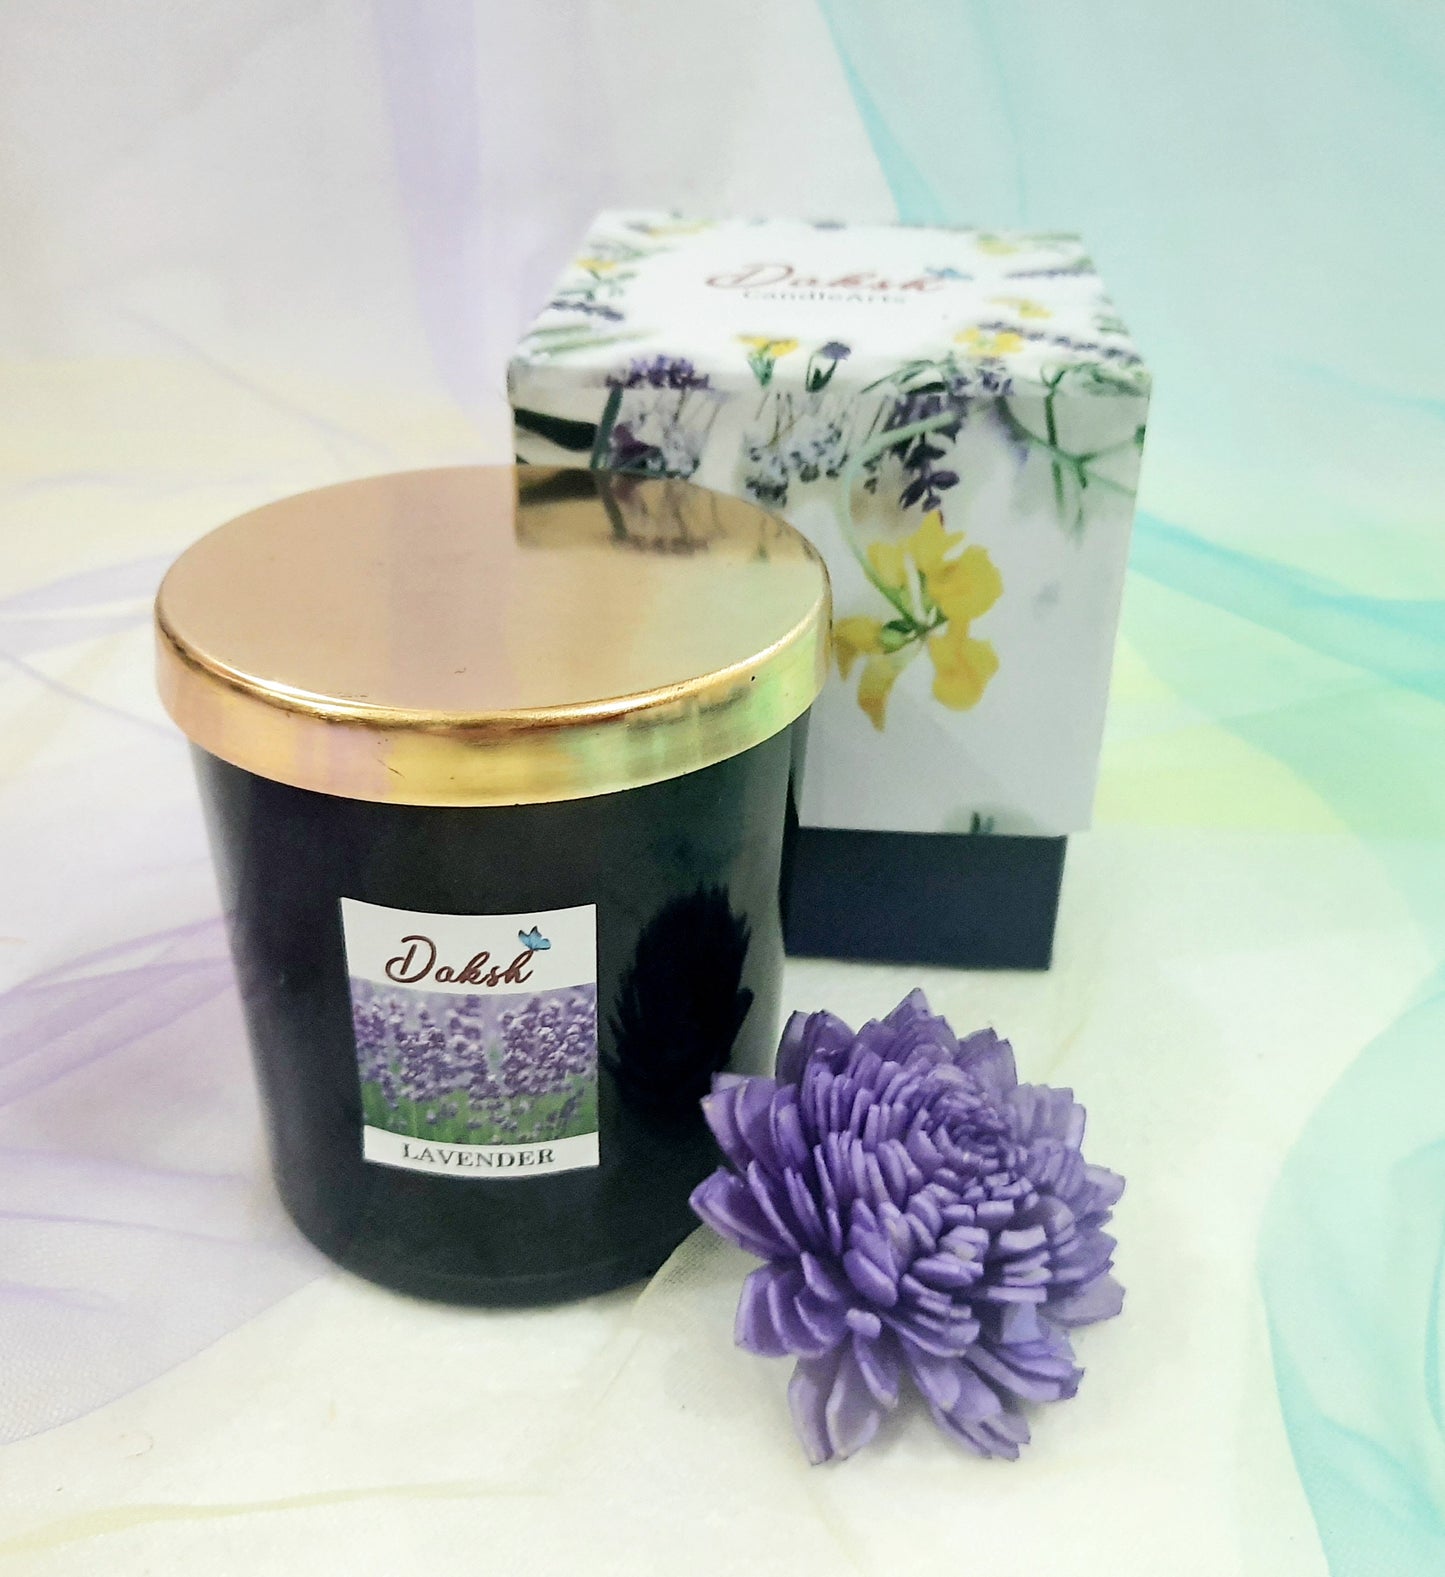 Black Golden Lid jar Candle in a Luxury Gift Box - Lavender Scented